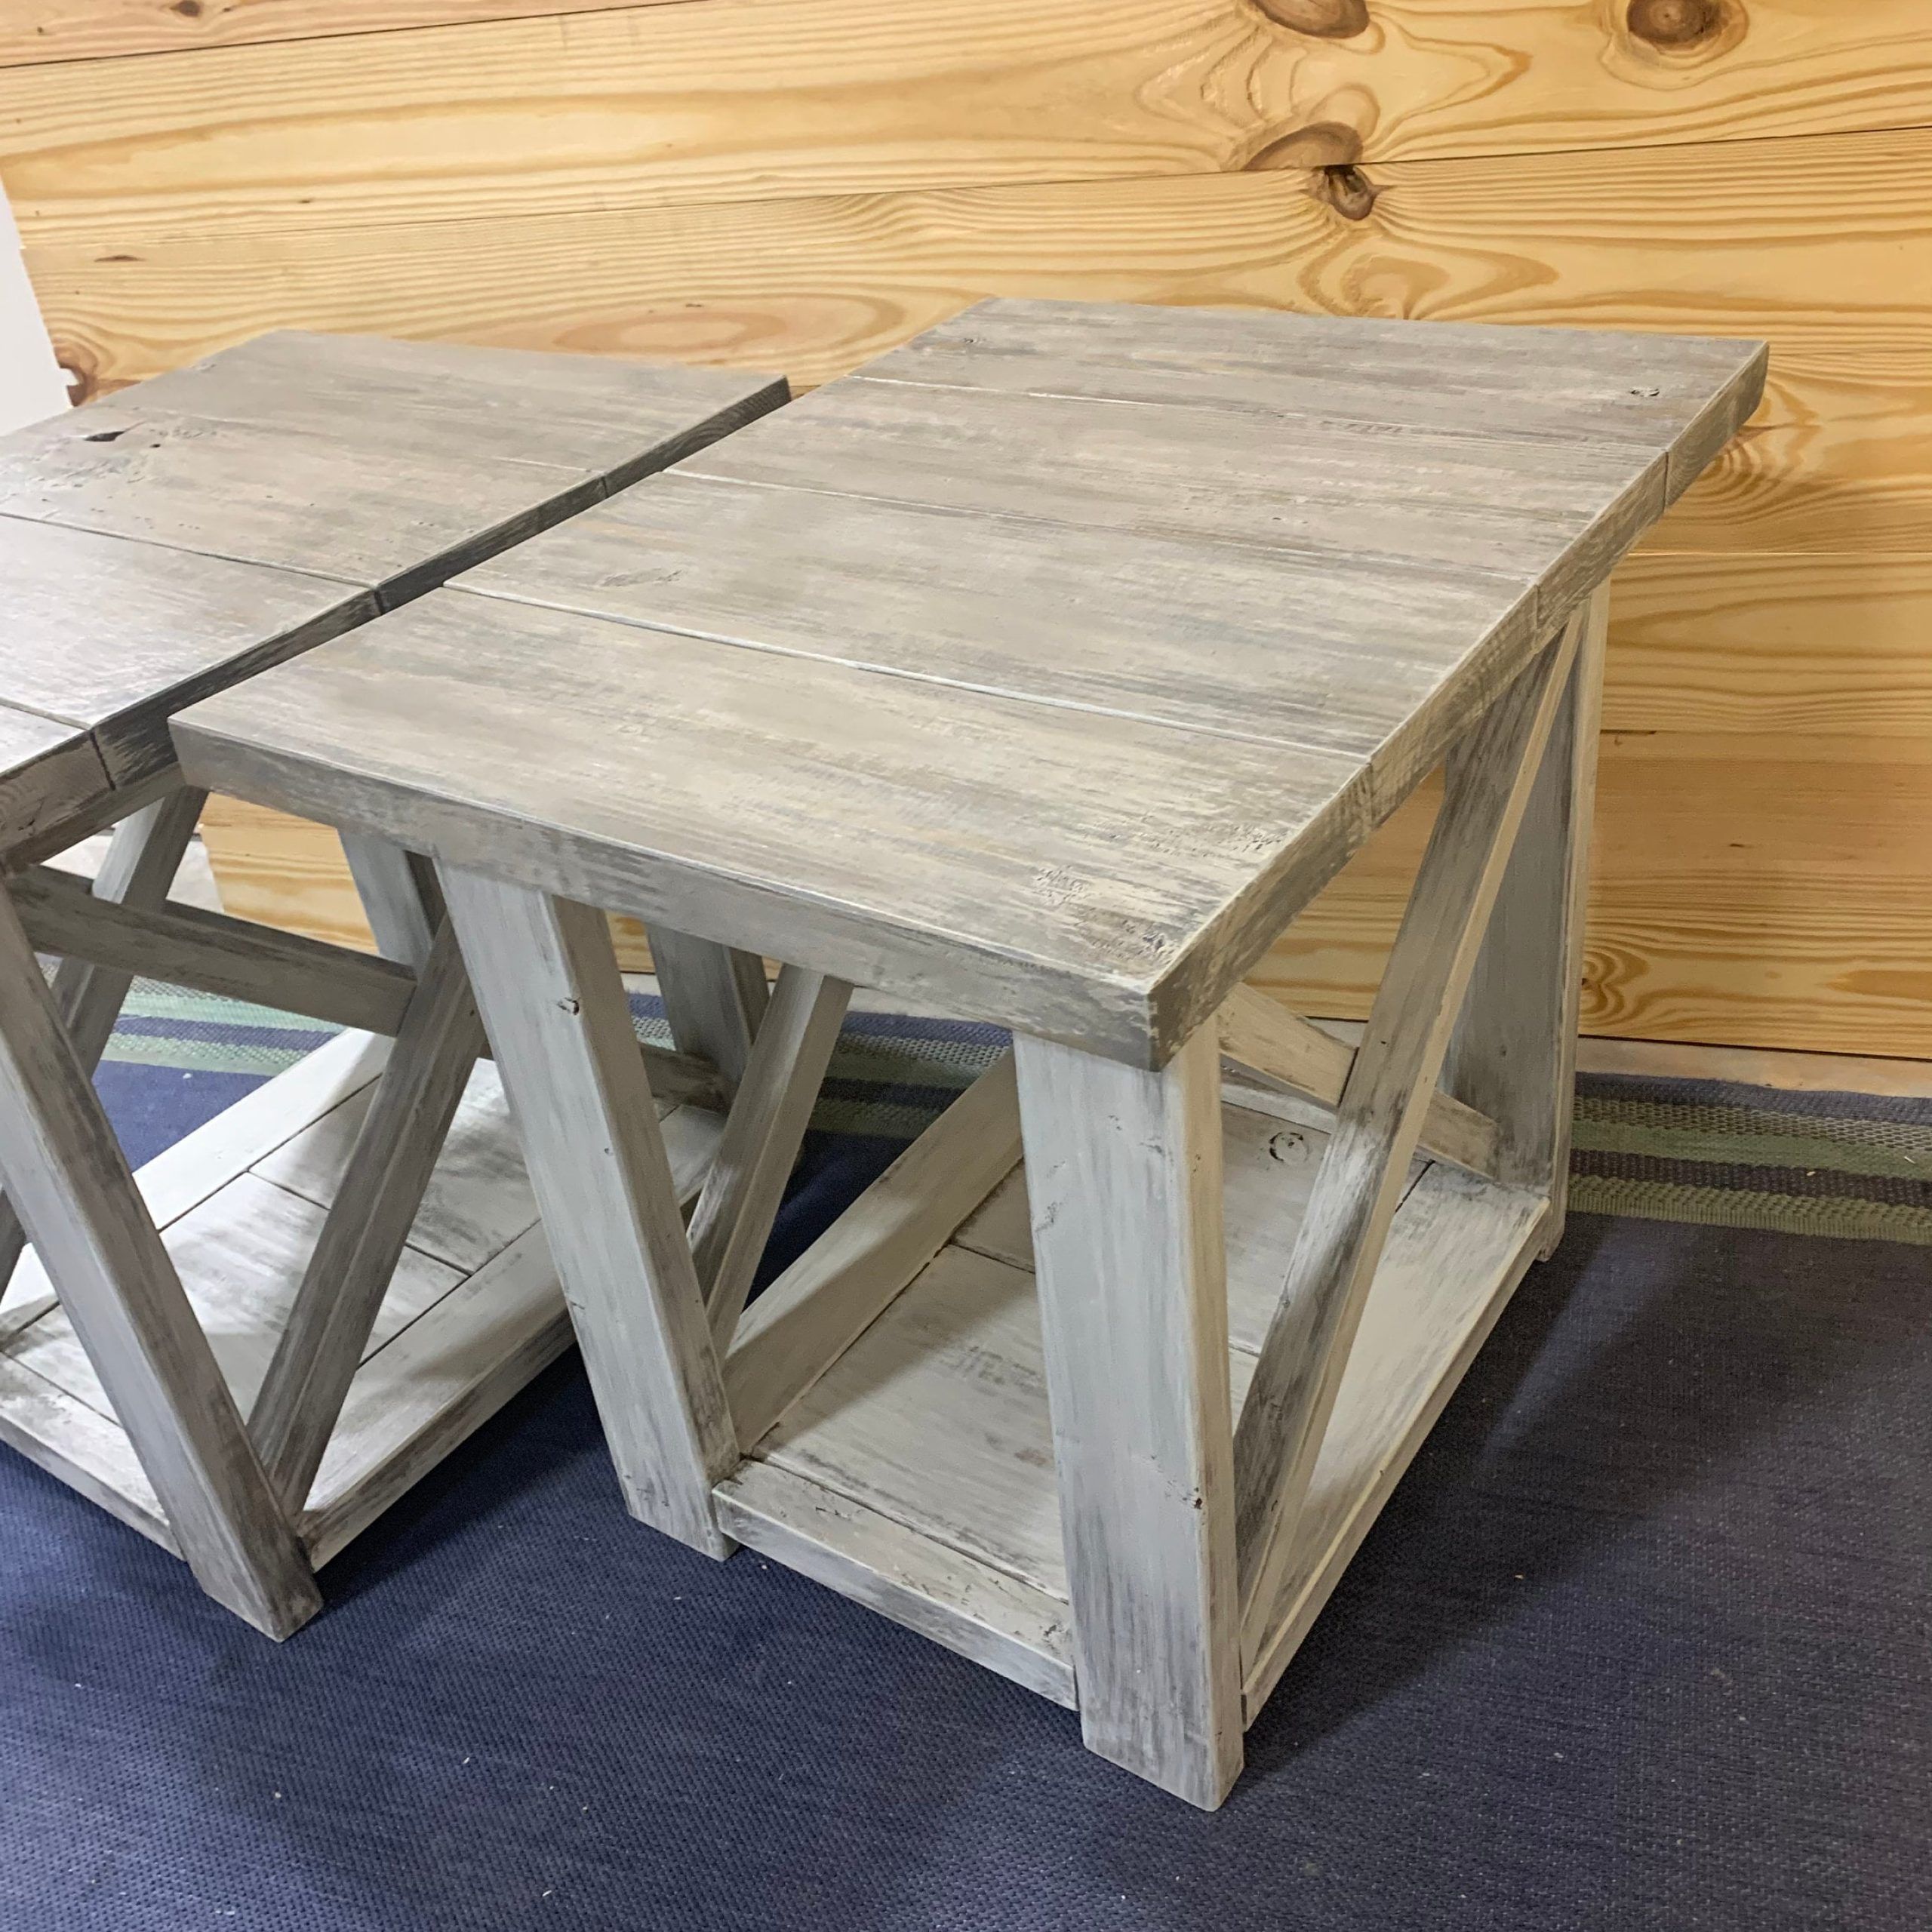 Long Rustic Farmhouse End Tables Gray White Wash Top With A Distressed Regarding Rustic Gray End Tables (View 13 of 20)